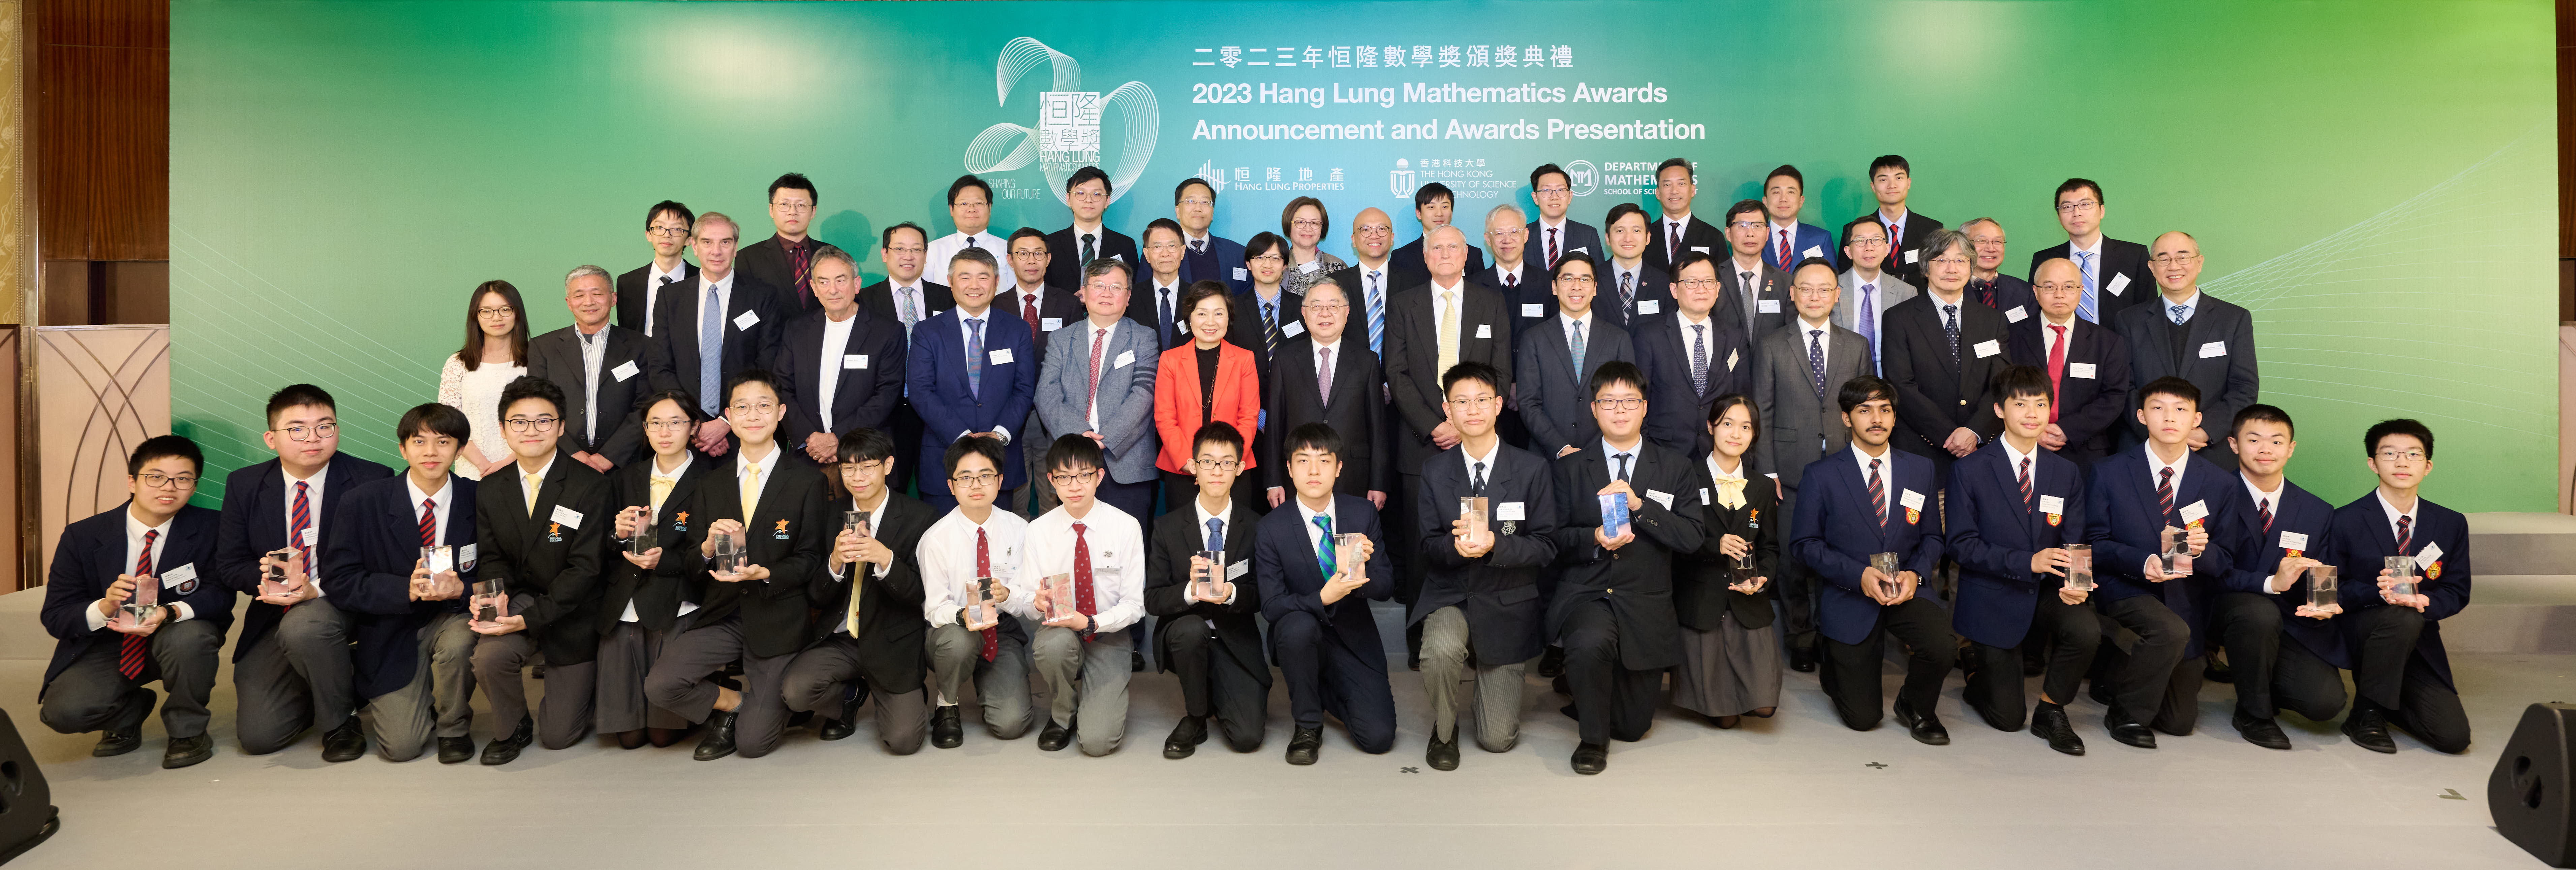 A photo of the winning teams of the 2023 Hang Lung Mathematics Awards with Dr. Christine CHOI, Secretary for Education of the Hong Kong Special Administrative Region (seventh left, second row); Mr. Ronnie C. CHAN, Chair (eighth left, second row); Mr. Adriel CHAN, Vice Chair (sixth right, second row); and Mr. Weber LO, Chief Executive Officer of Hang Lung Properties (fifth left, second row); Prof. GUO Yike, HKUST’s Provost (sixth left, second row); Prof. WANG Yang, HKUST’s Vice-President for Institutional Advancement (second right, second row); 2023 Hang Lung Mathematics Awards Scientific Committee Chair, Prof. Richard SCHOEN, 2017 Wolf Prize Laureate in Mathematics (seventh right, second row), and members of Scientific Committee, Steering Committee, Executive Committee, and Screening Panel, including HKUST’s faculty members from Department of Mathematics who contributed to the competition